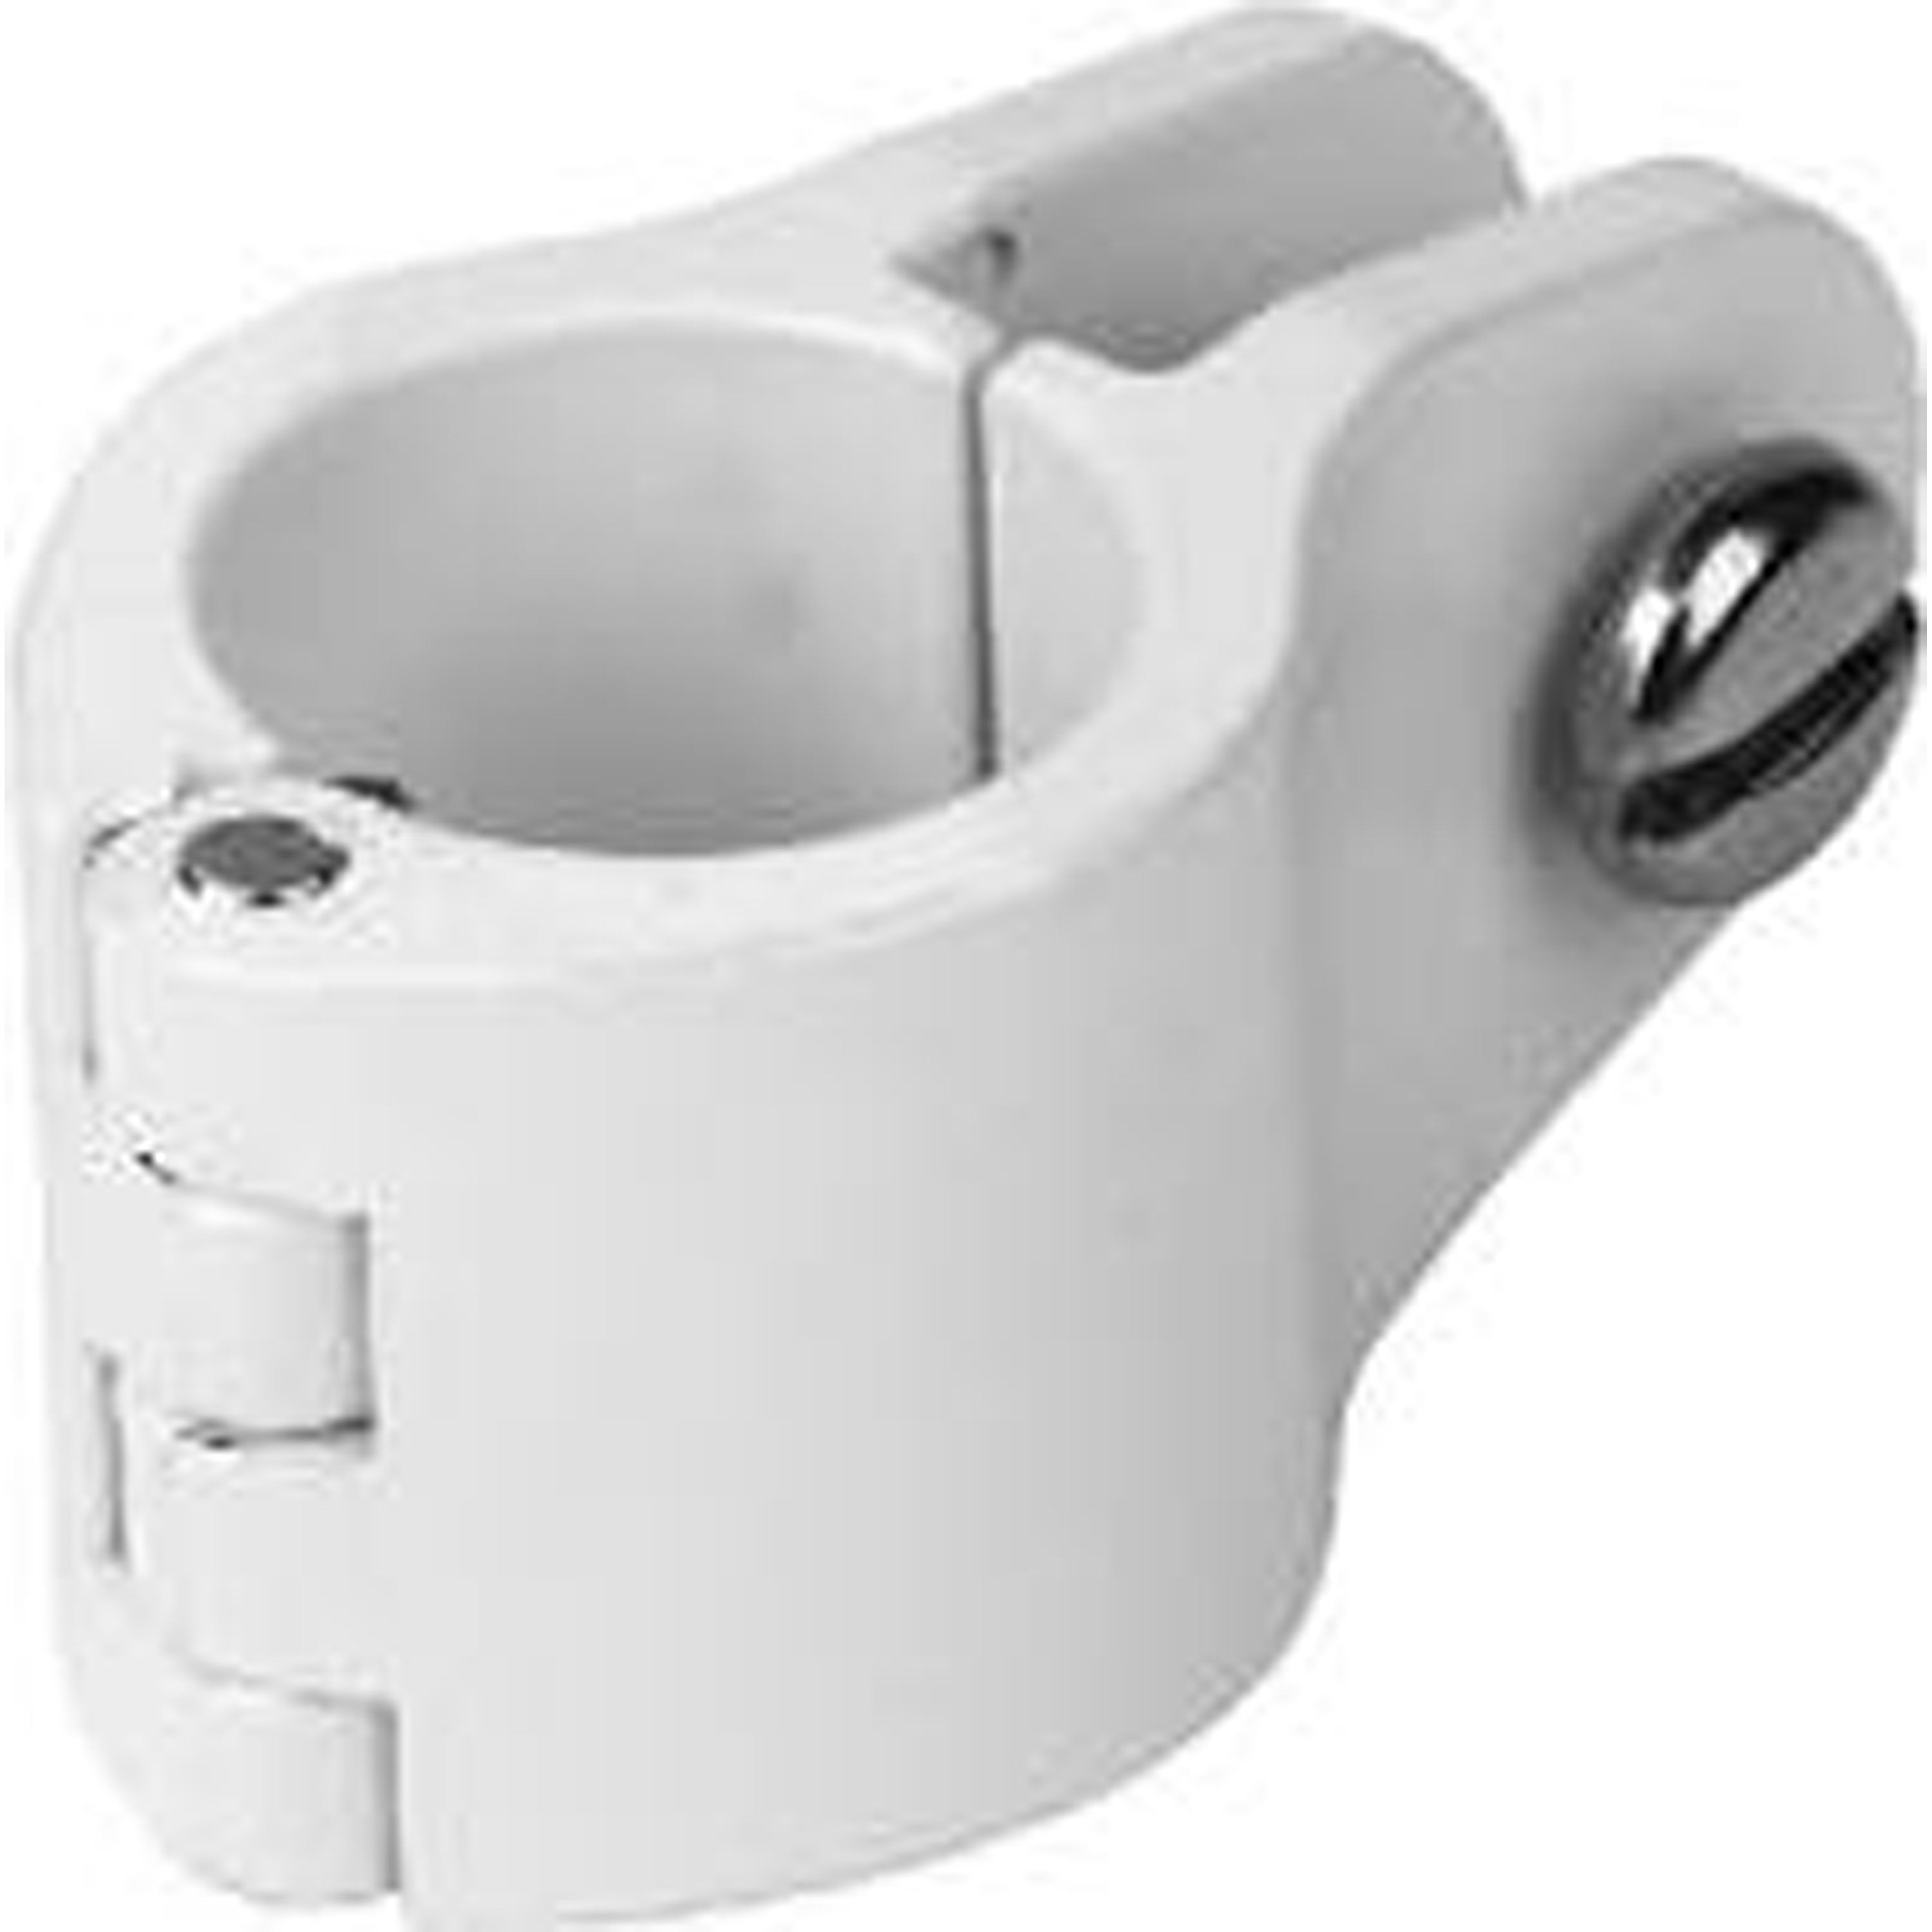 Sea-Dog 273163-1 Hinged Jaw Slide Fitting with Bolt - 7/8", White